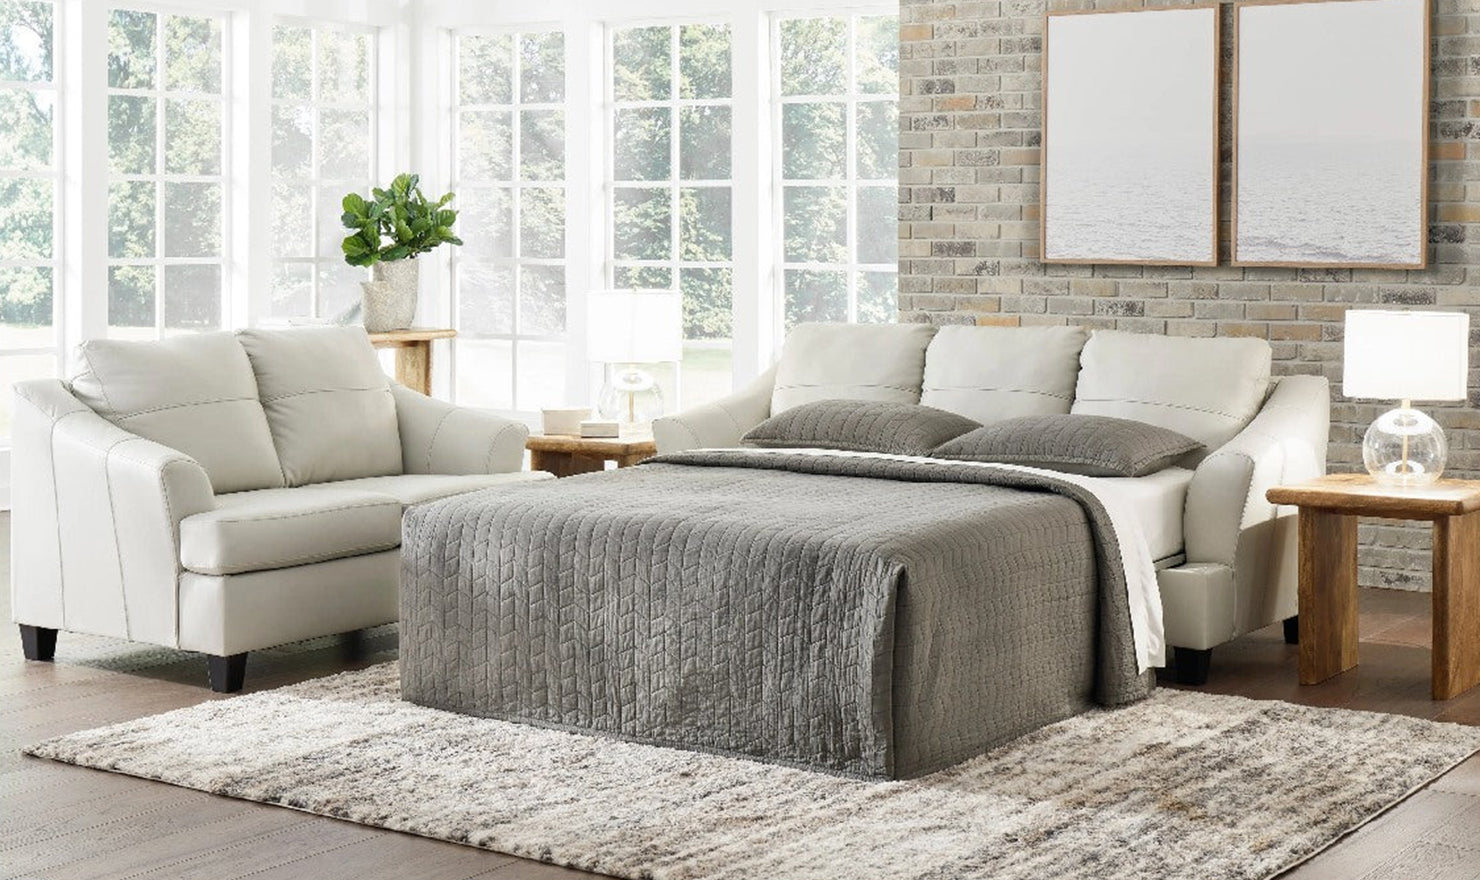 Upgrades to Make a Sofa Bed Worth Sleeping On